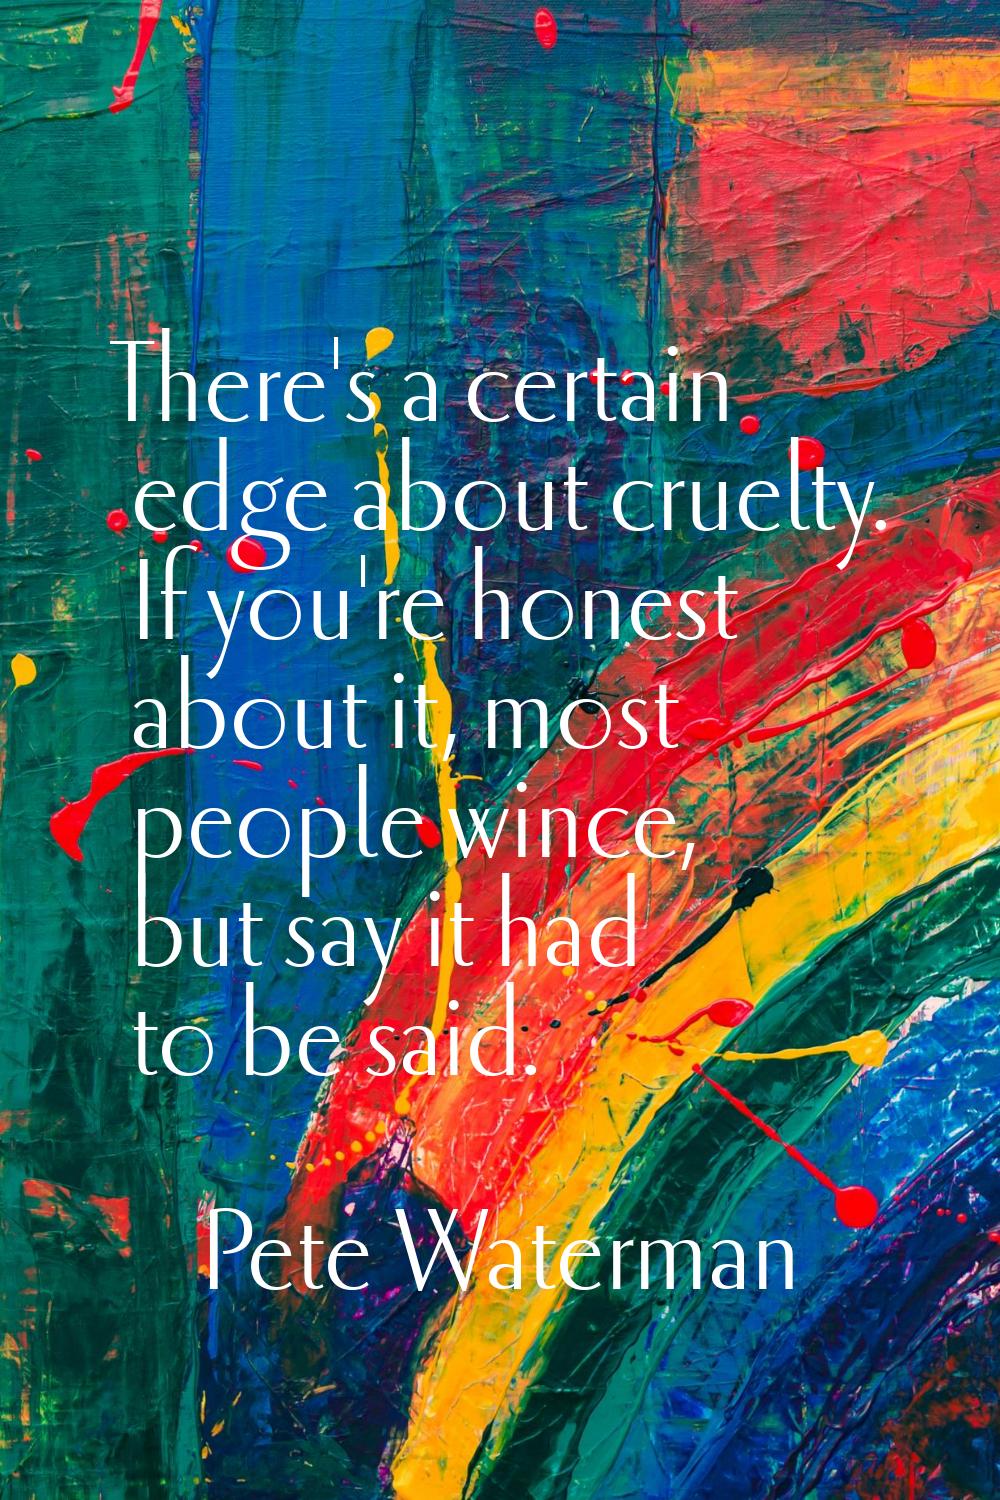 There's a certain edge about cruelty. If you're honest about it, most people wince, but say it had 